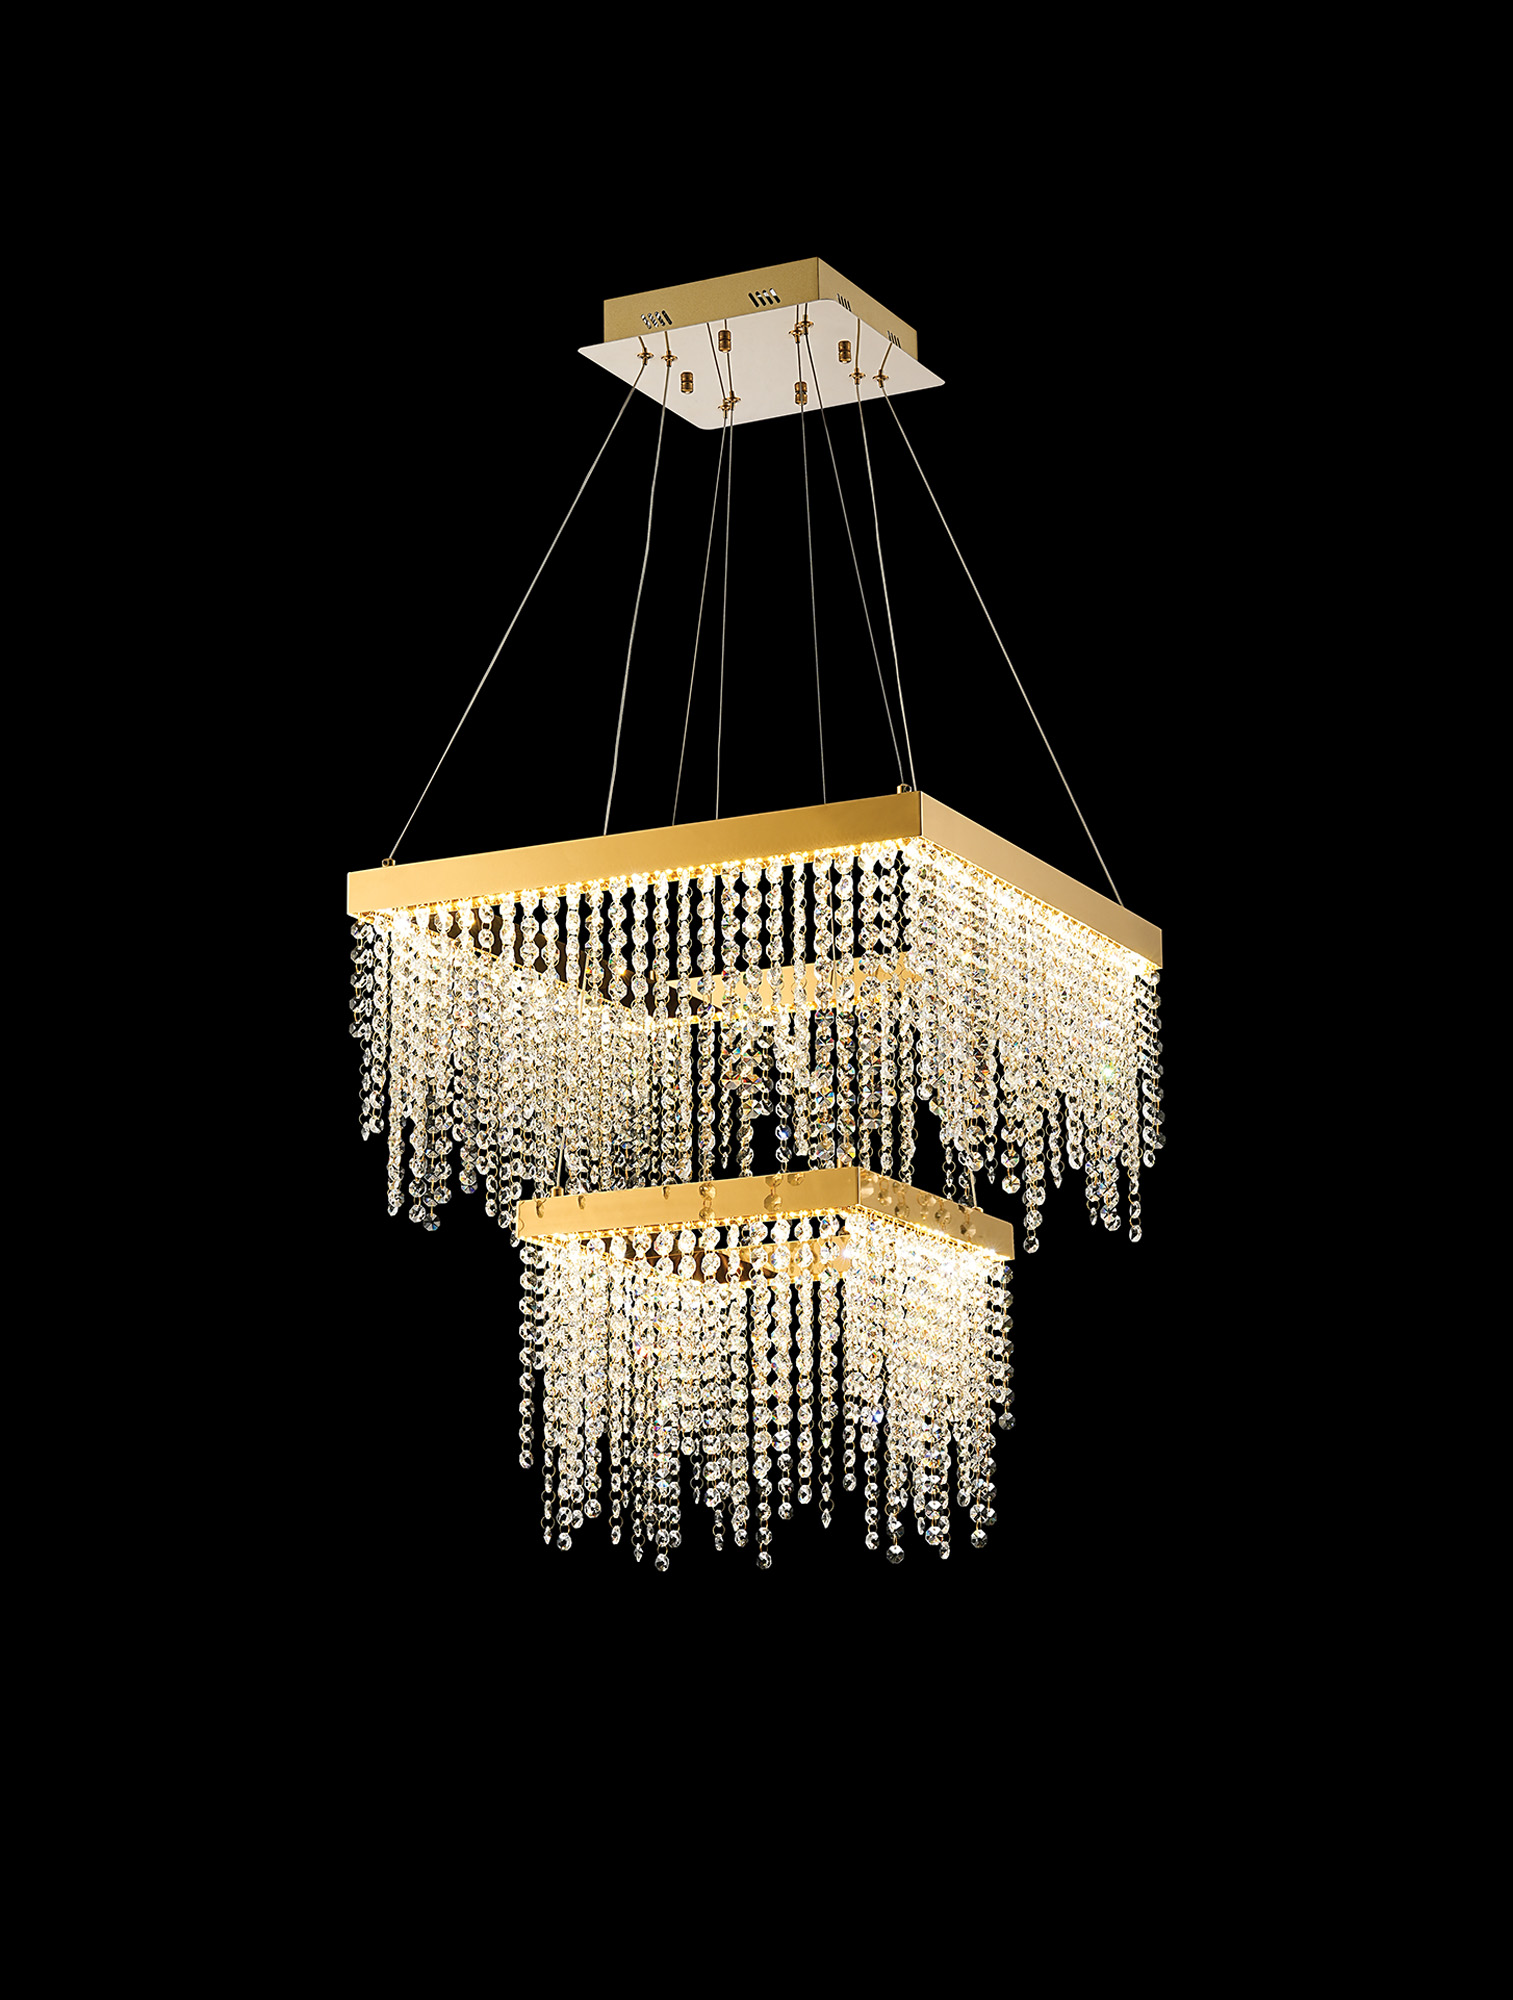 IL32874  Bano Square Dimmable 2 Tier Pendant 47W LED French Gold